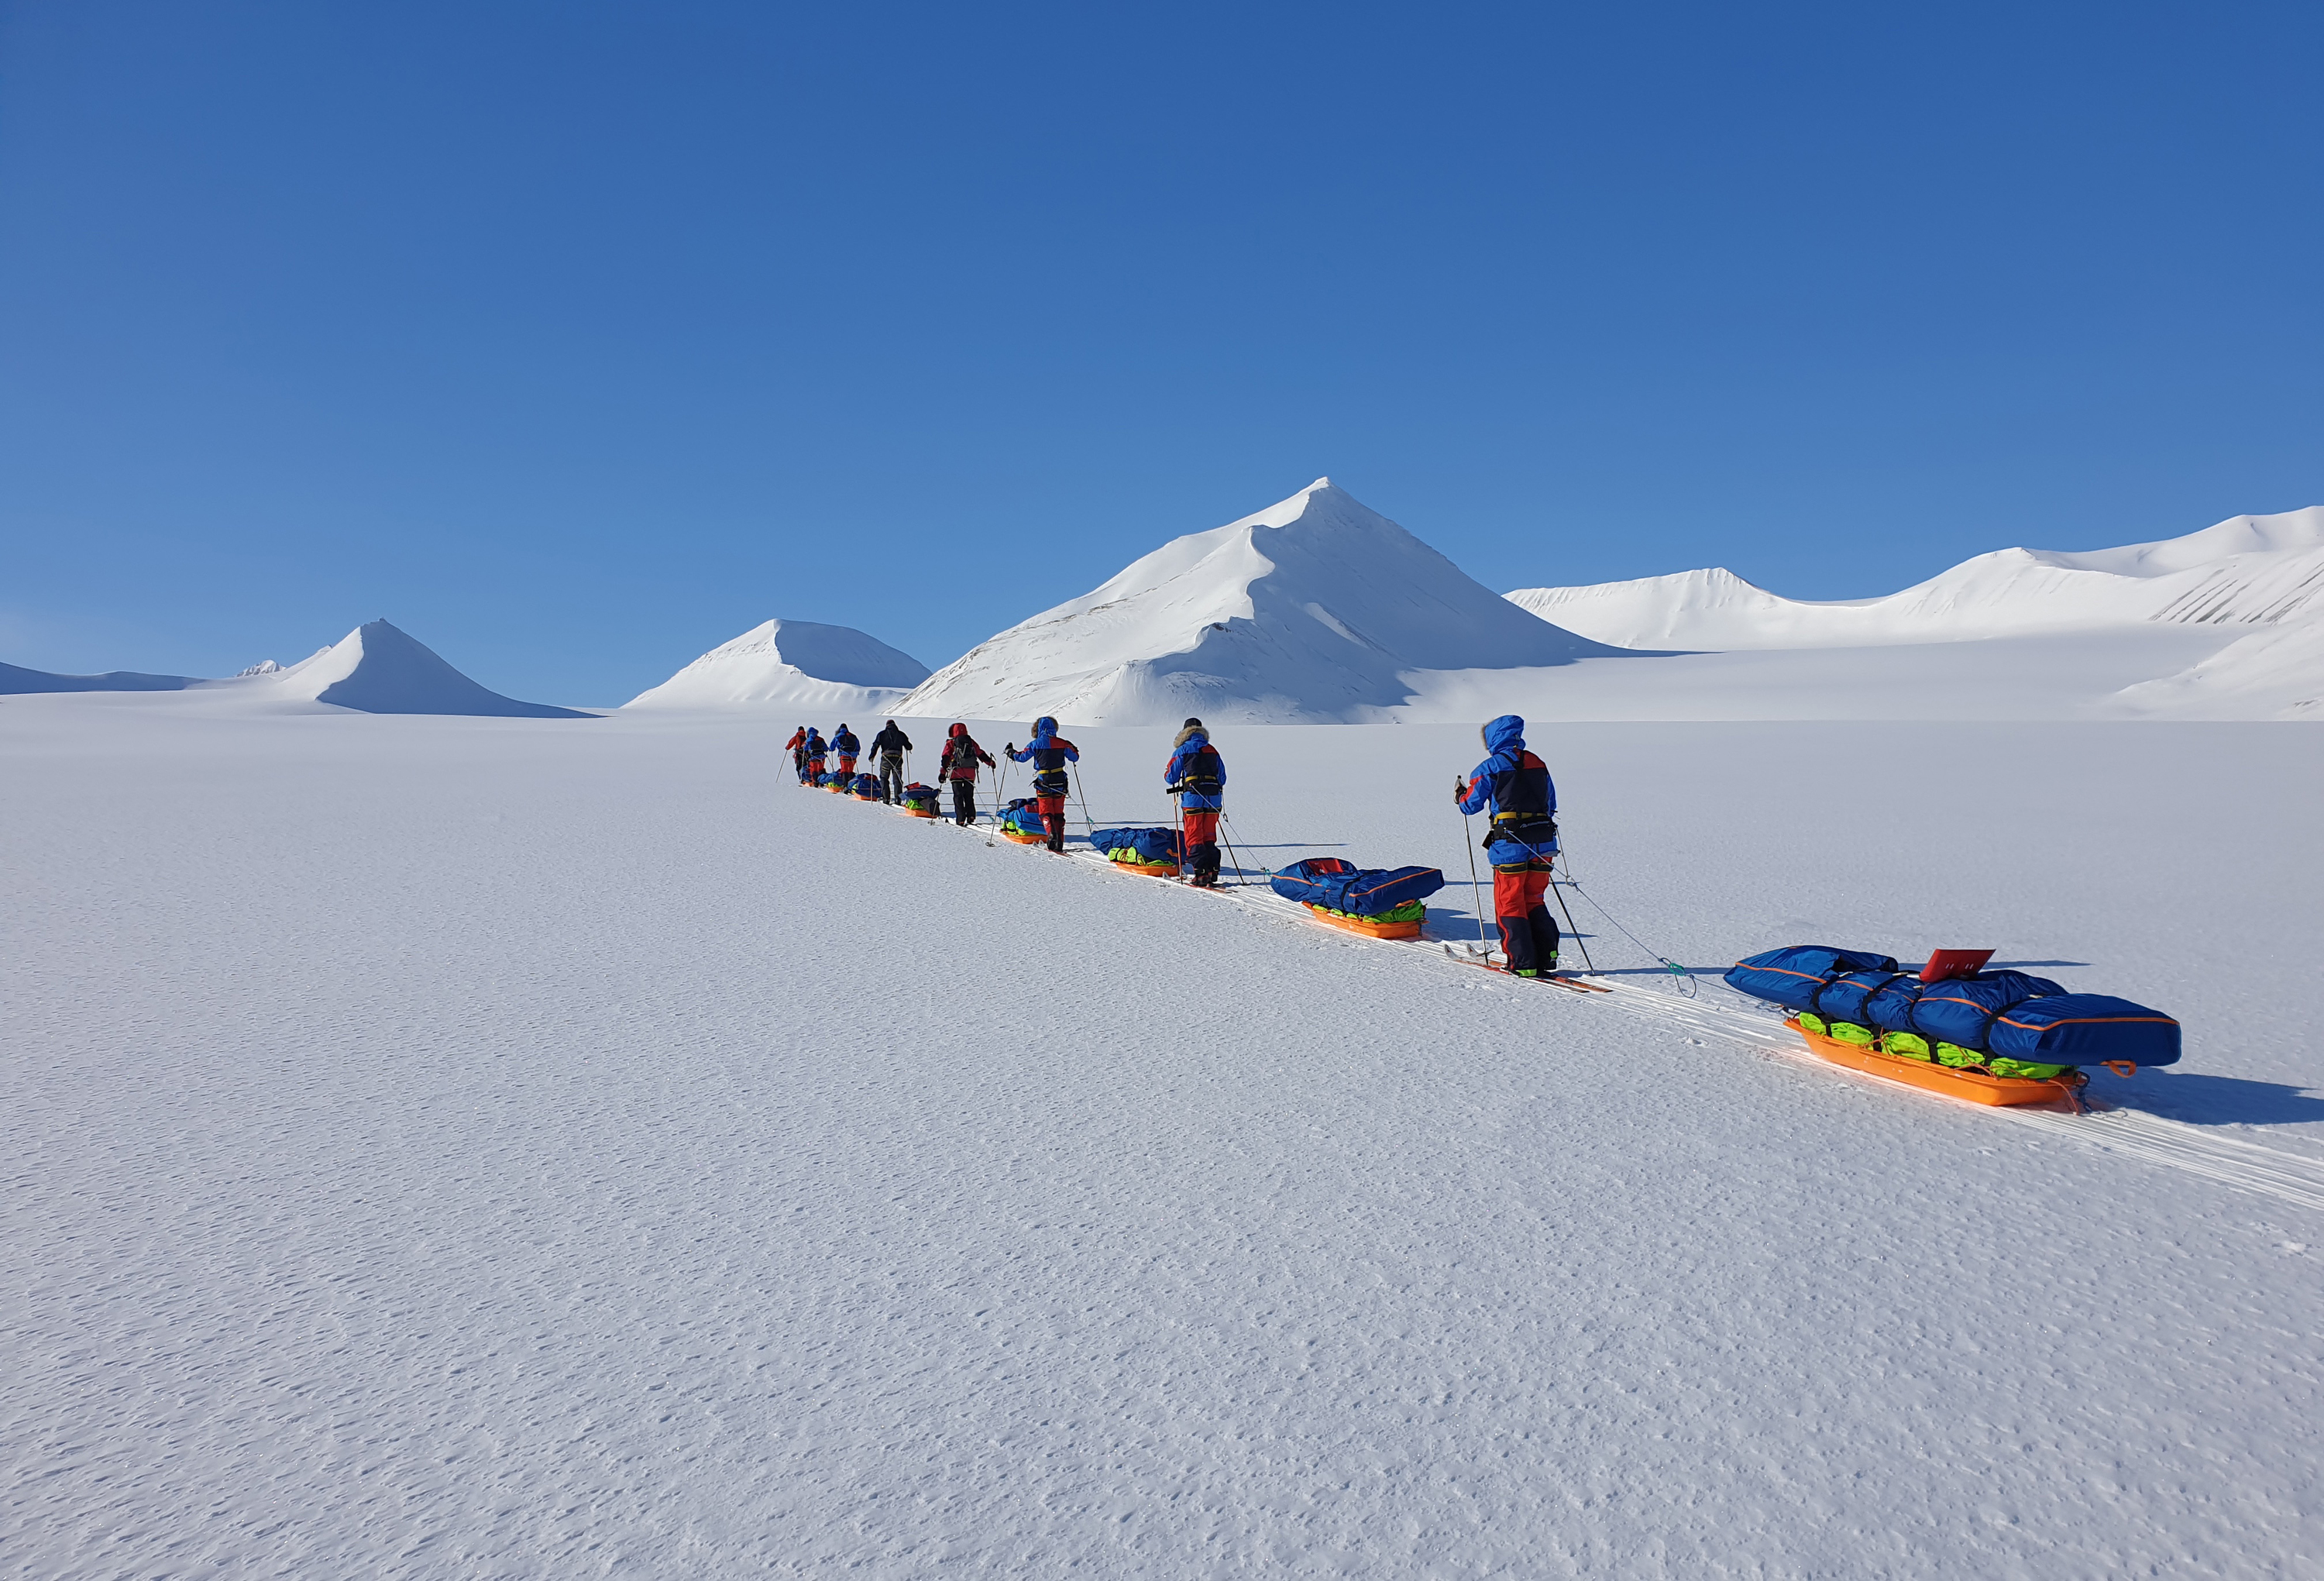 Ski Expedition experience at Svalbard